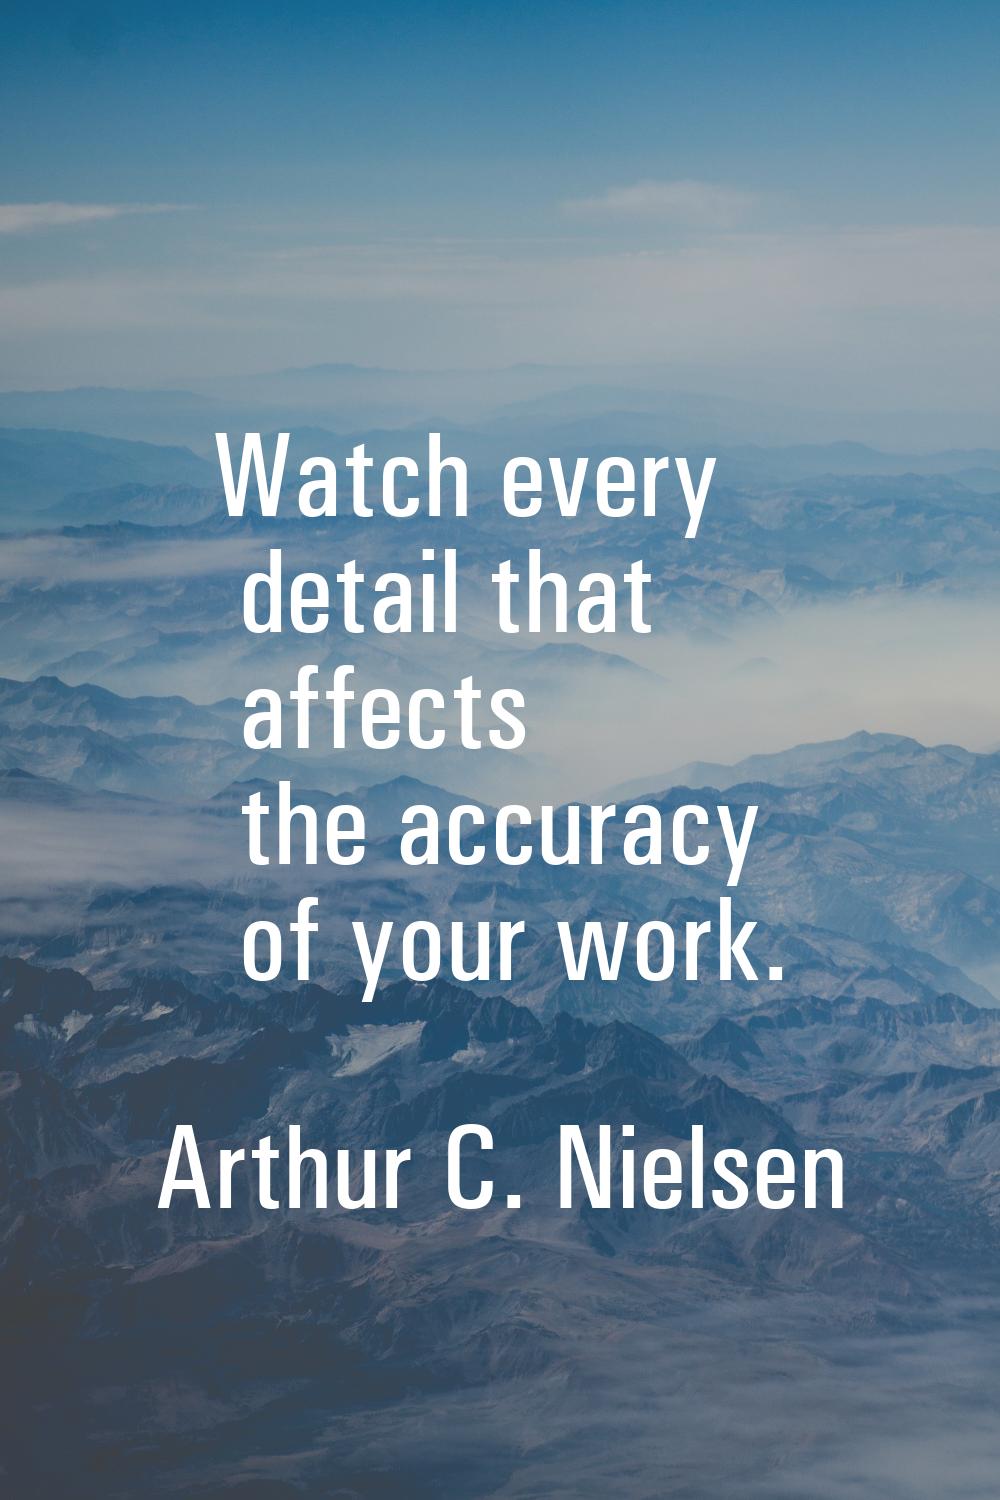 Watch every detail that affects the accuracy of your work.